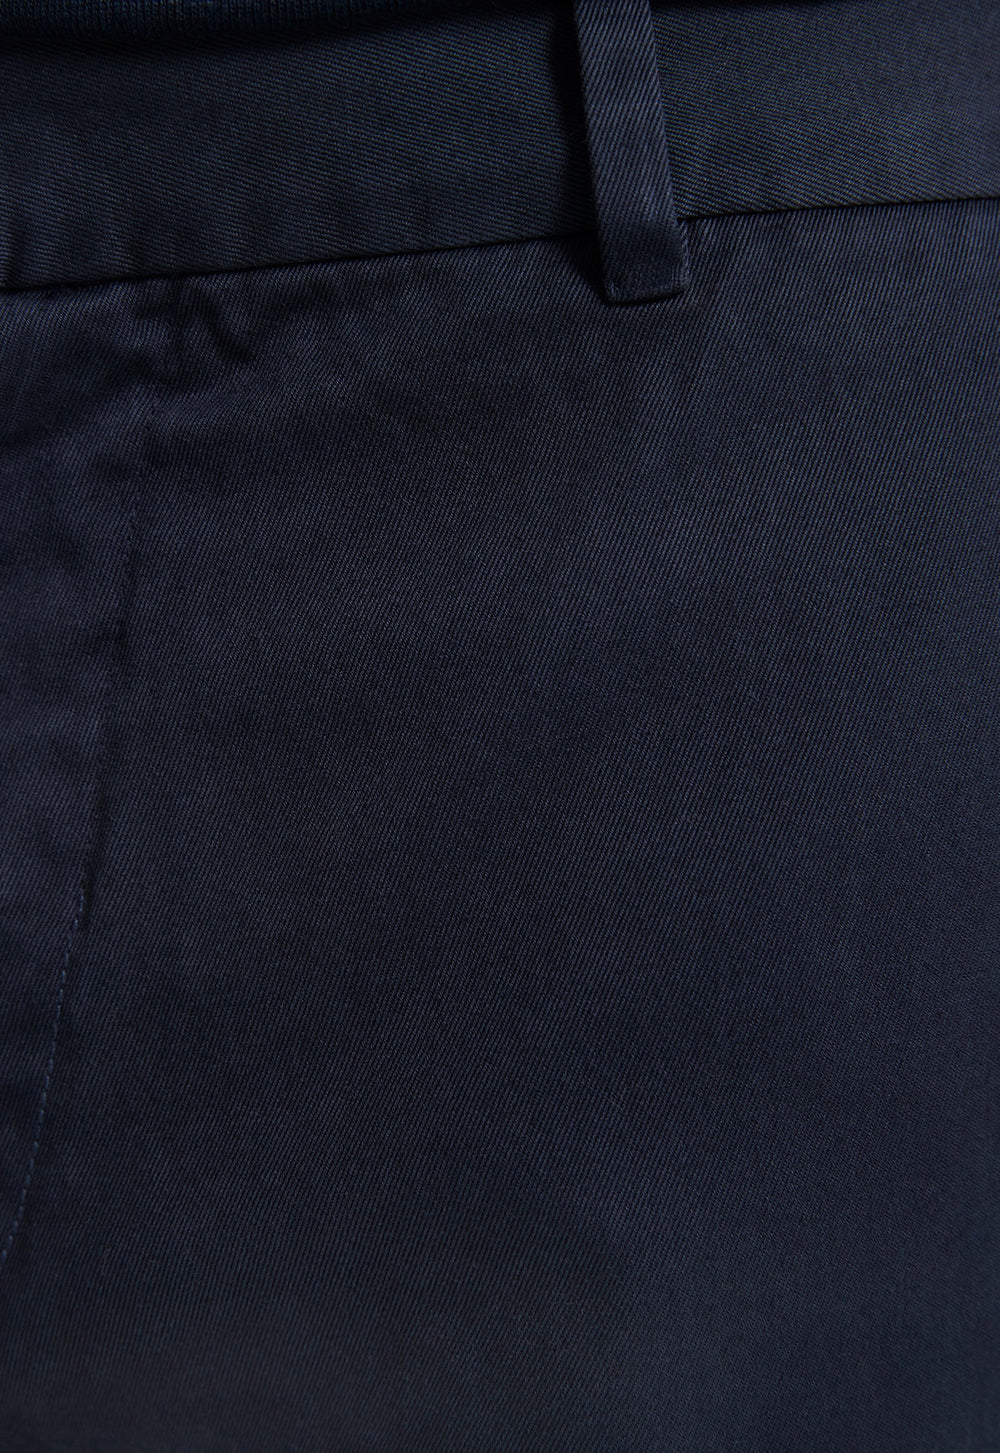 Jac+Jack CAST COTTON TWILL PANT in Navy